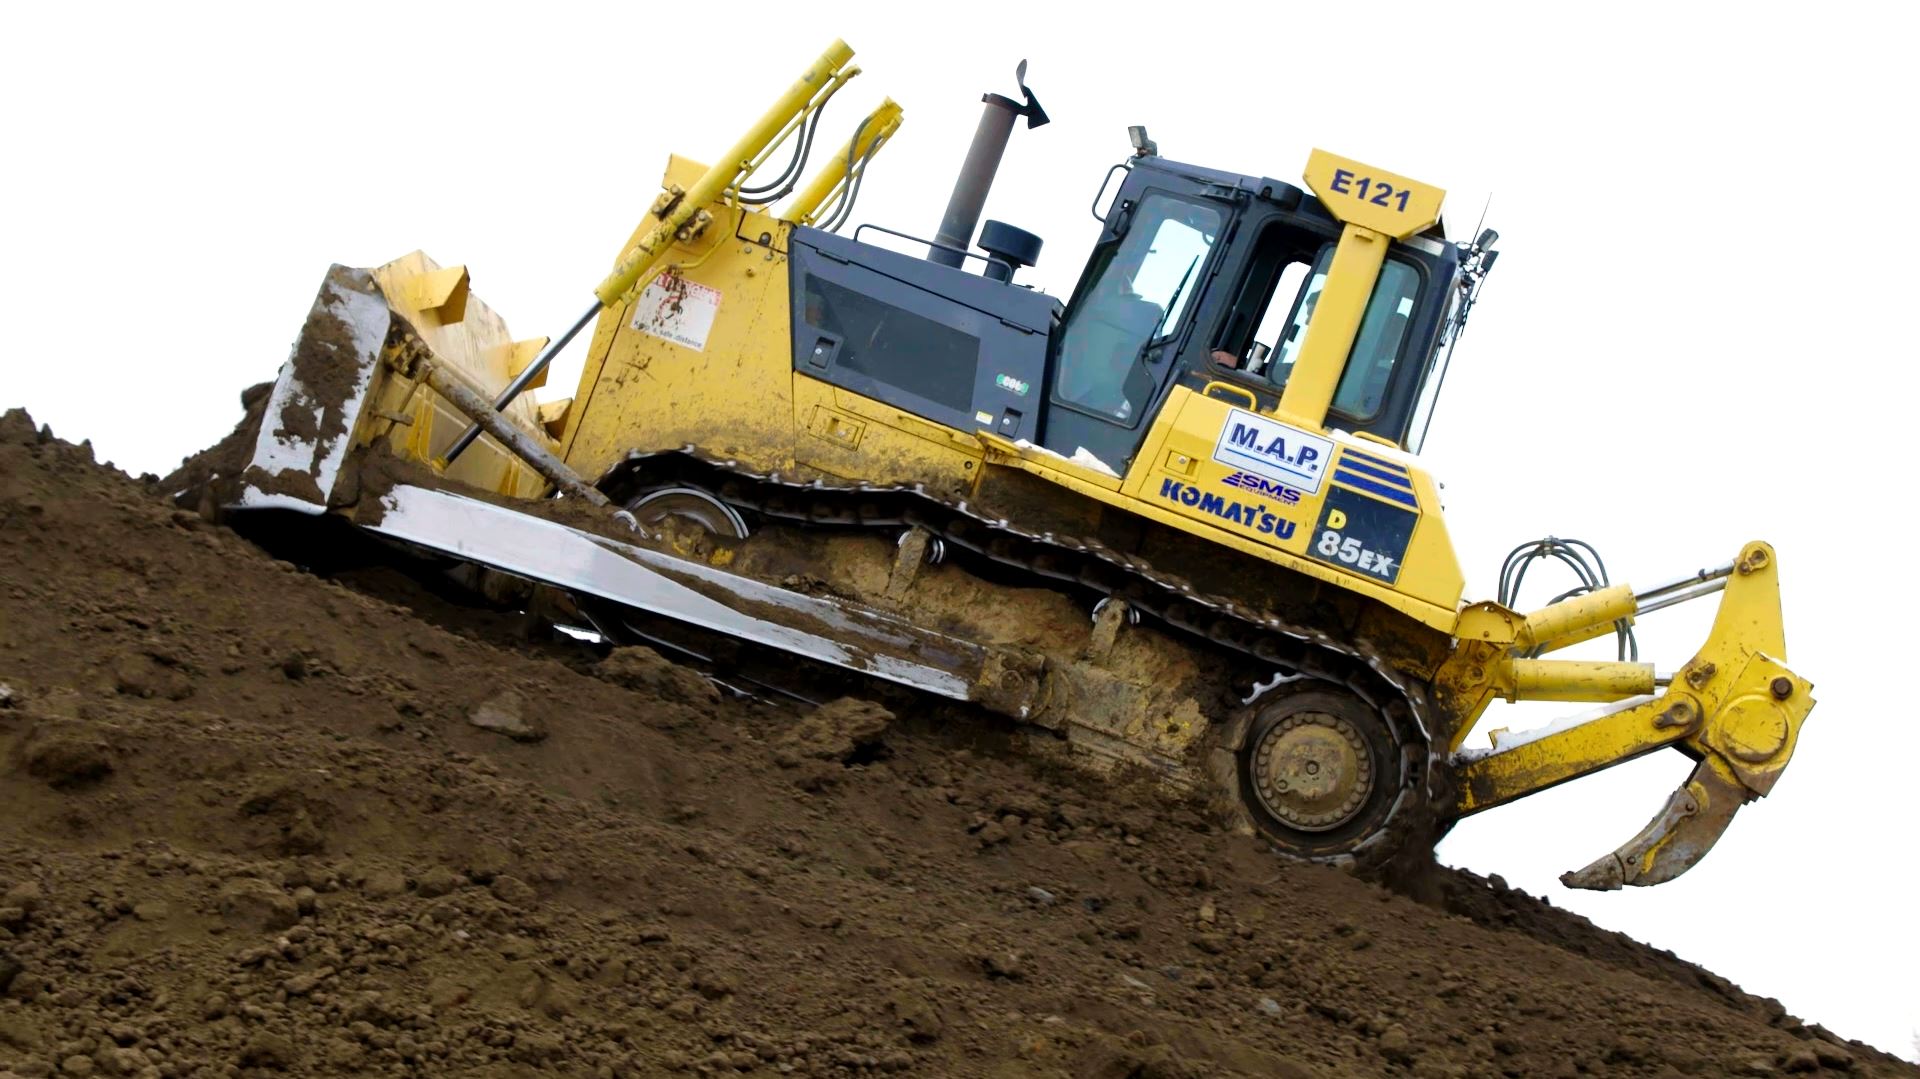 About 15 years ago, when the Edmonton-based M.A.P. Group of Companies needed an extra dozer for their fleet, SMS Equipment called and gave them a Komatsu D65 to try out.